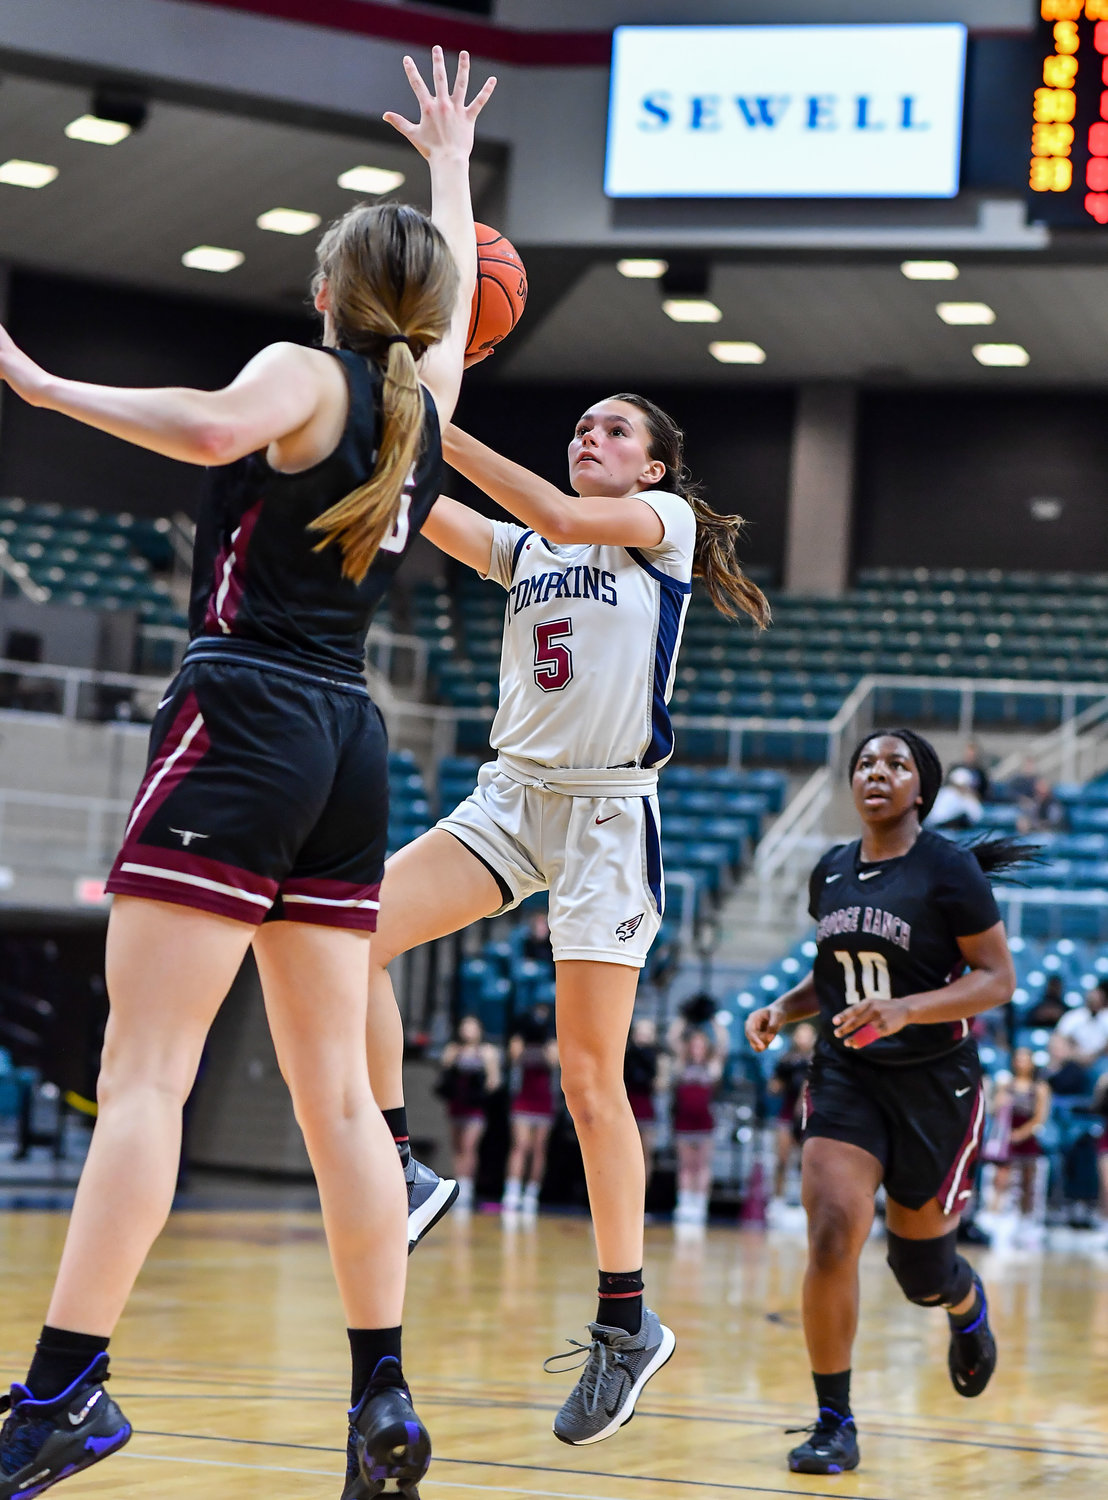 Katy Tx. Feb 15, 2022: Tompkins Kayla Boven #5 drives up the lane to the basket during the Bi-District playoff, Tompkins vs George Ranch. (Photo by Mark Goodman / Katy Times)